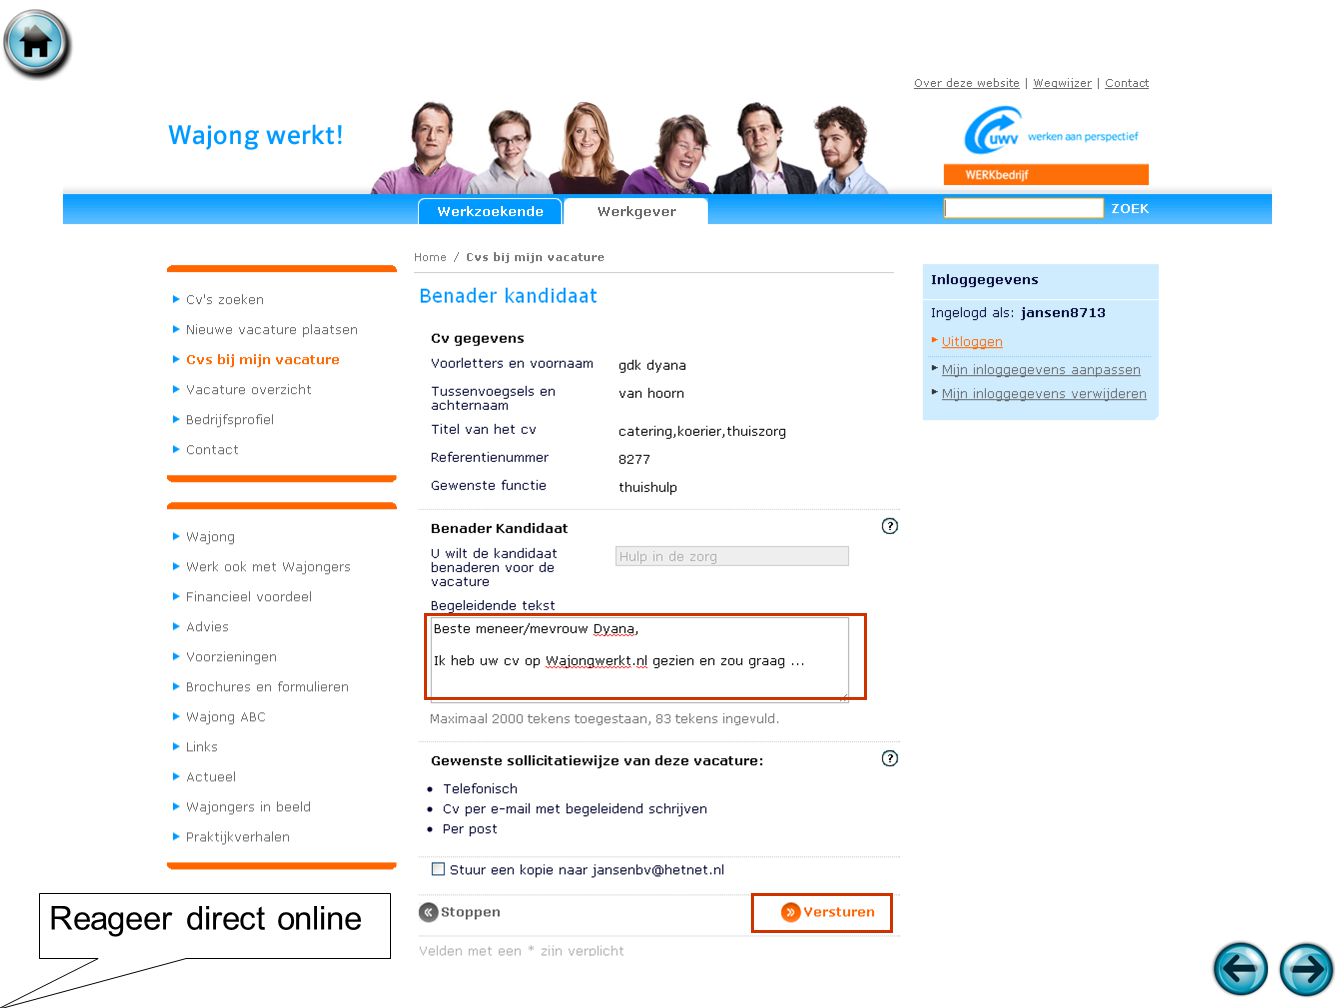 Reageer direct online